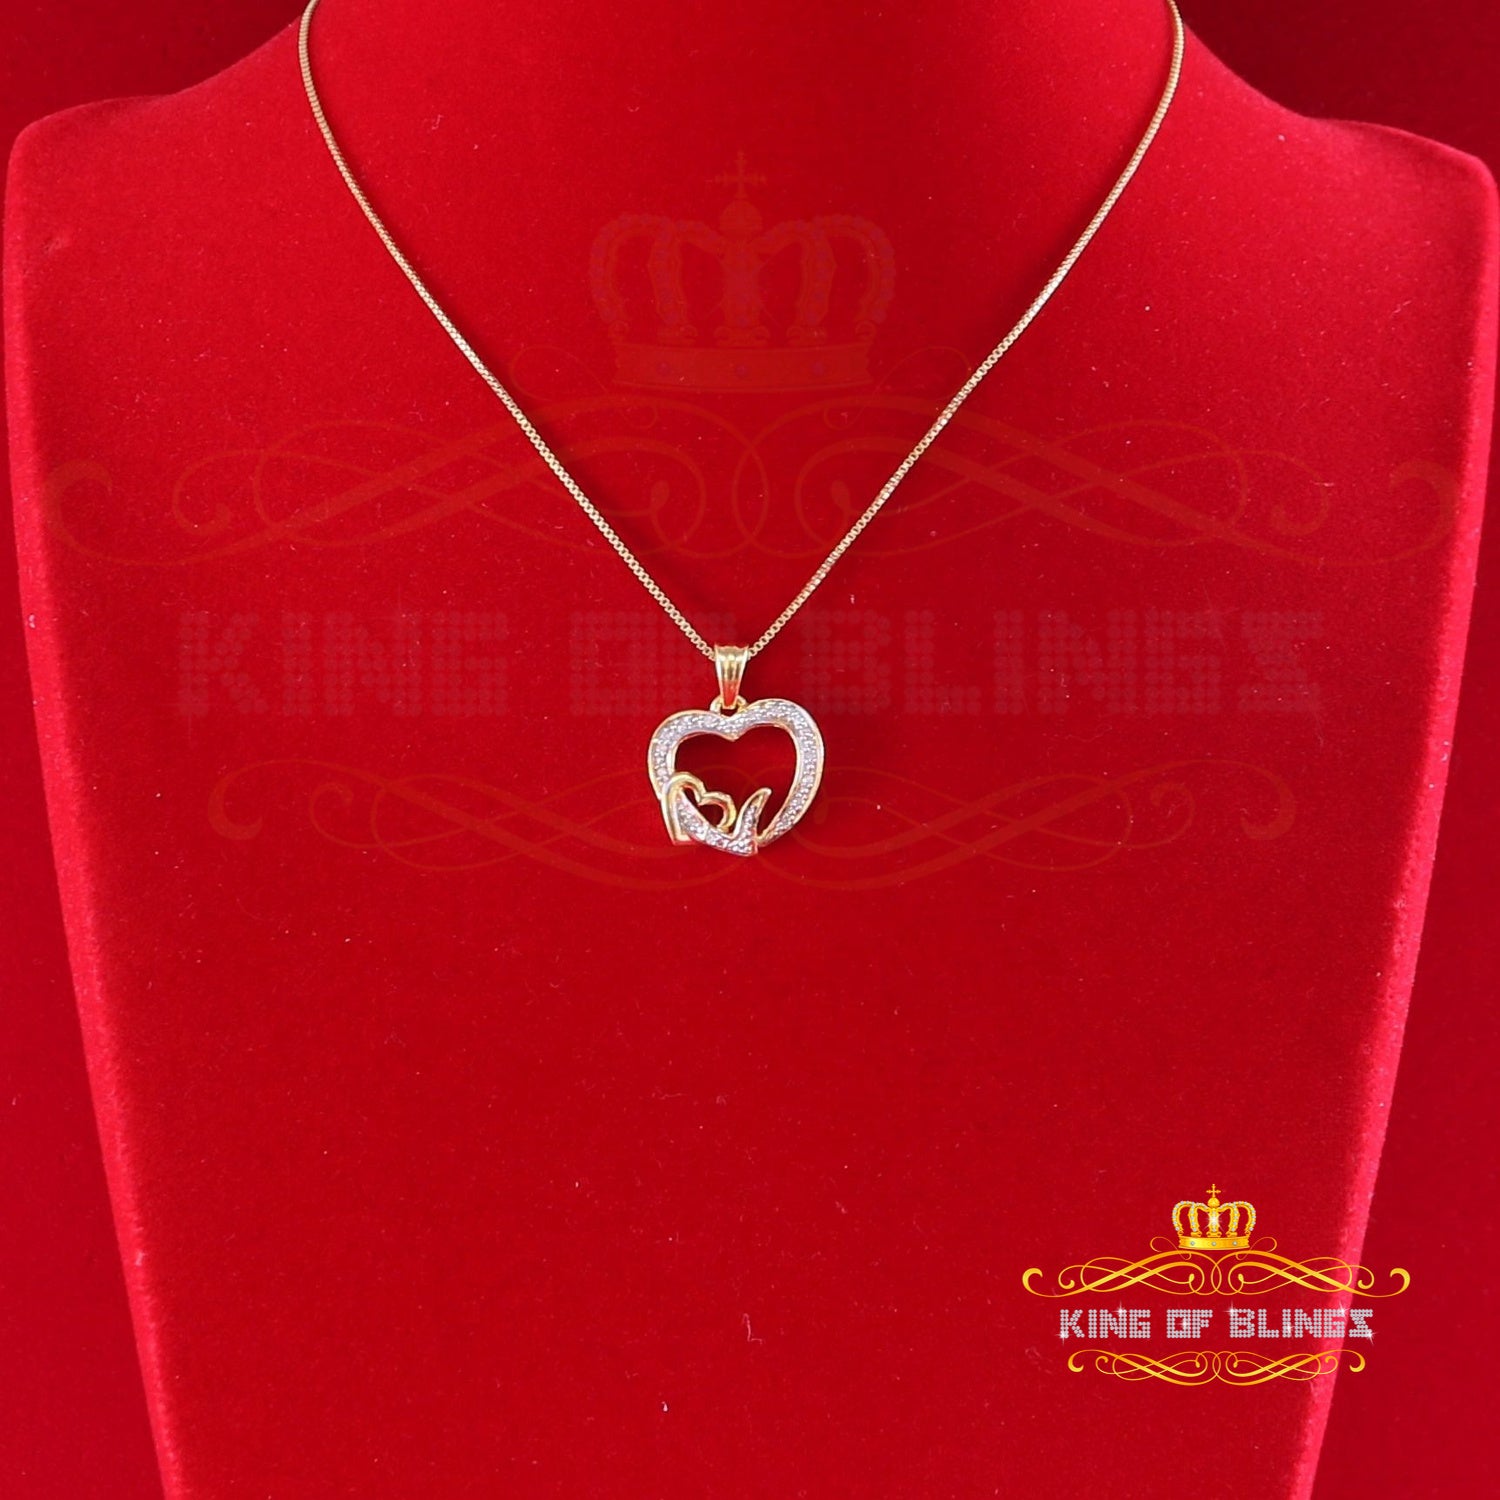 King Of Bling's Real 0.08ct Diamond 925 Sterling Silver HEART Charm Necklace Yellow Pendant KING OF BLINGS